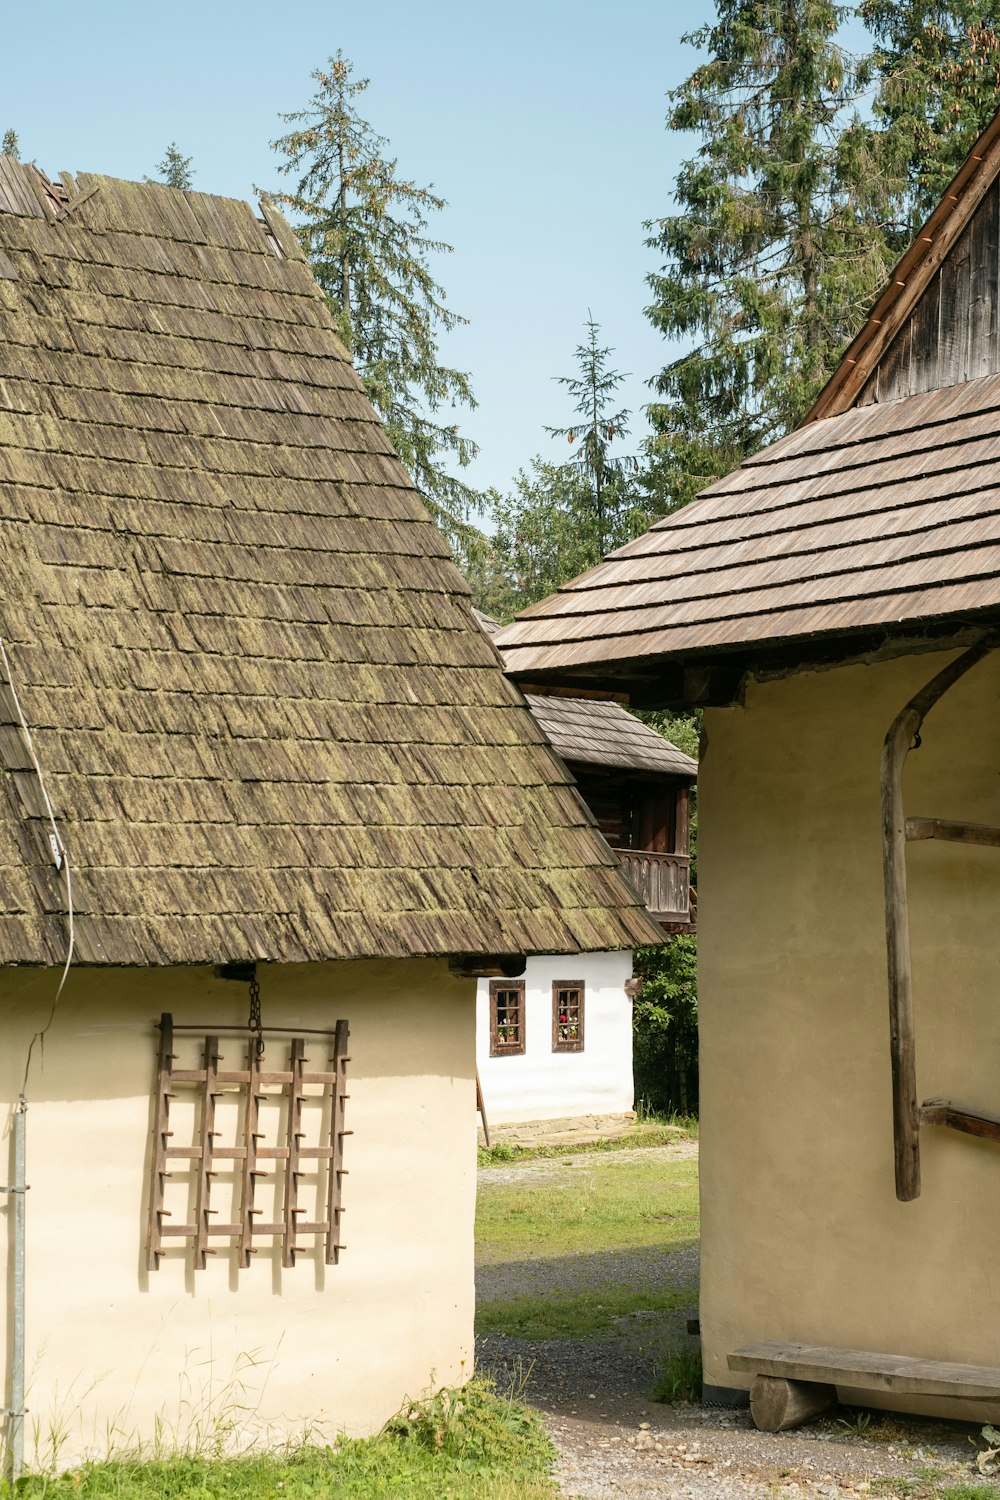 a building with a thatched roof next to another building